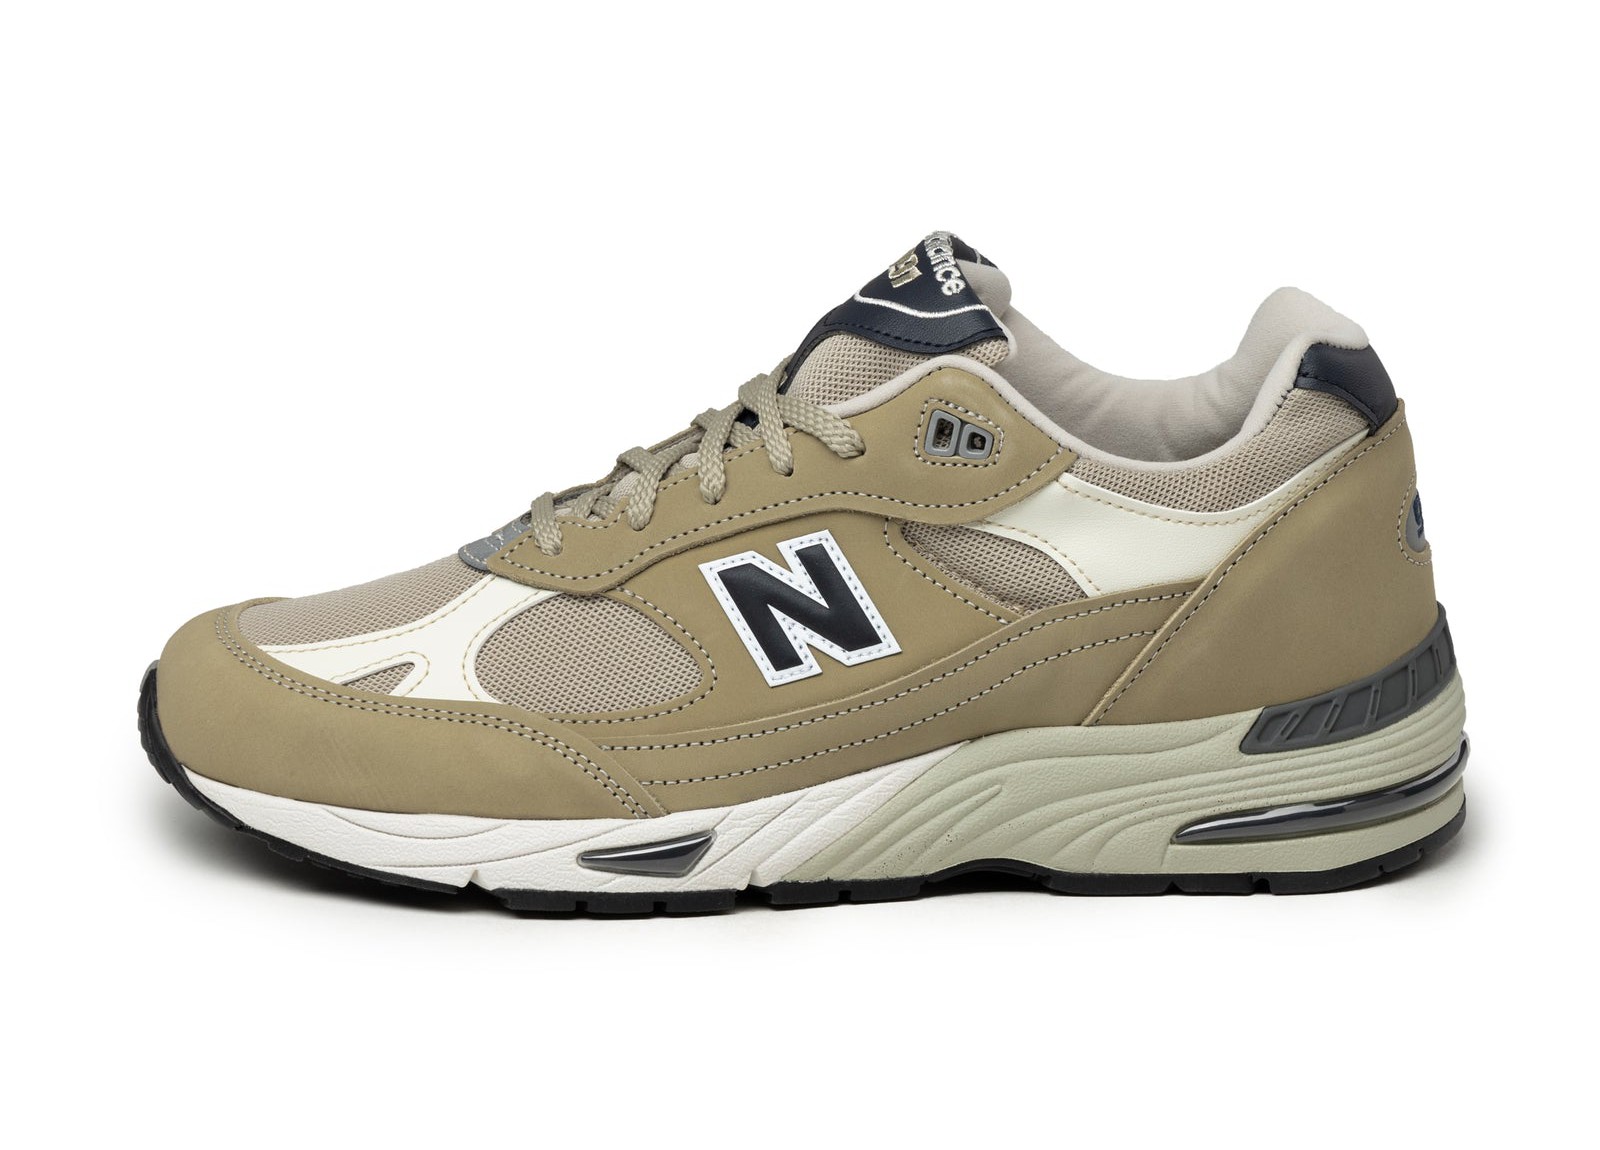 New Balance M991BTN
Made in England
Elm / Brown Rice